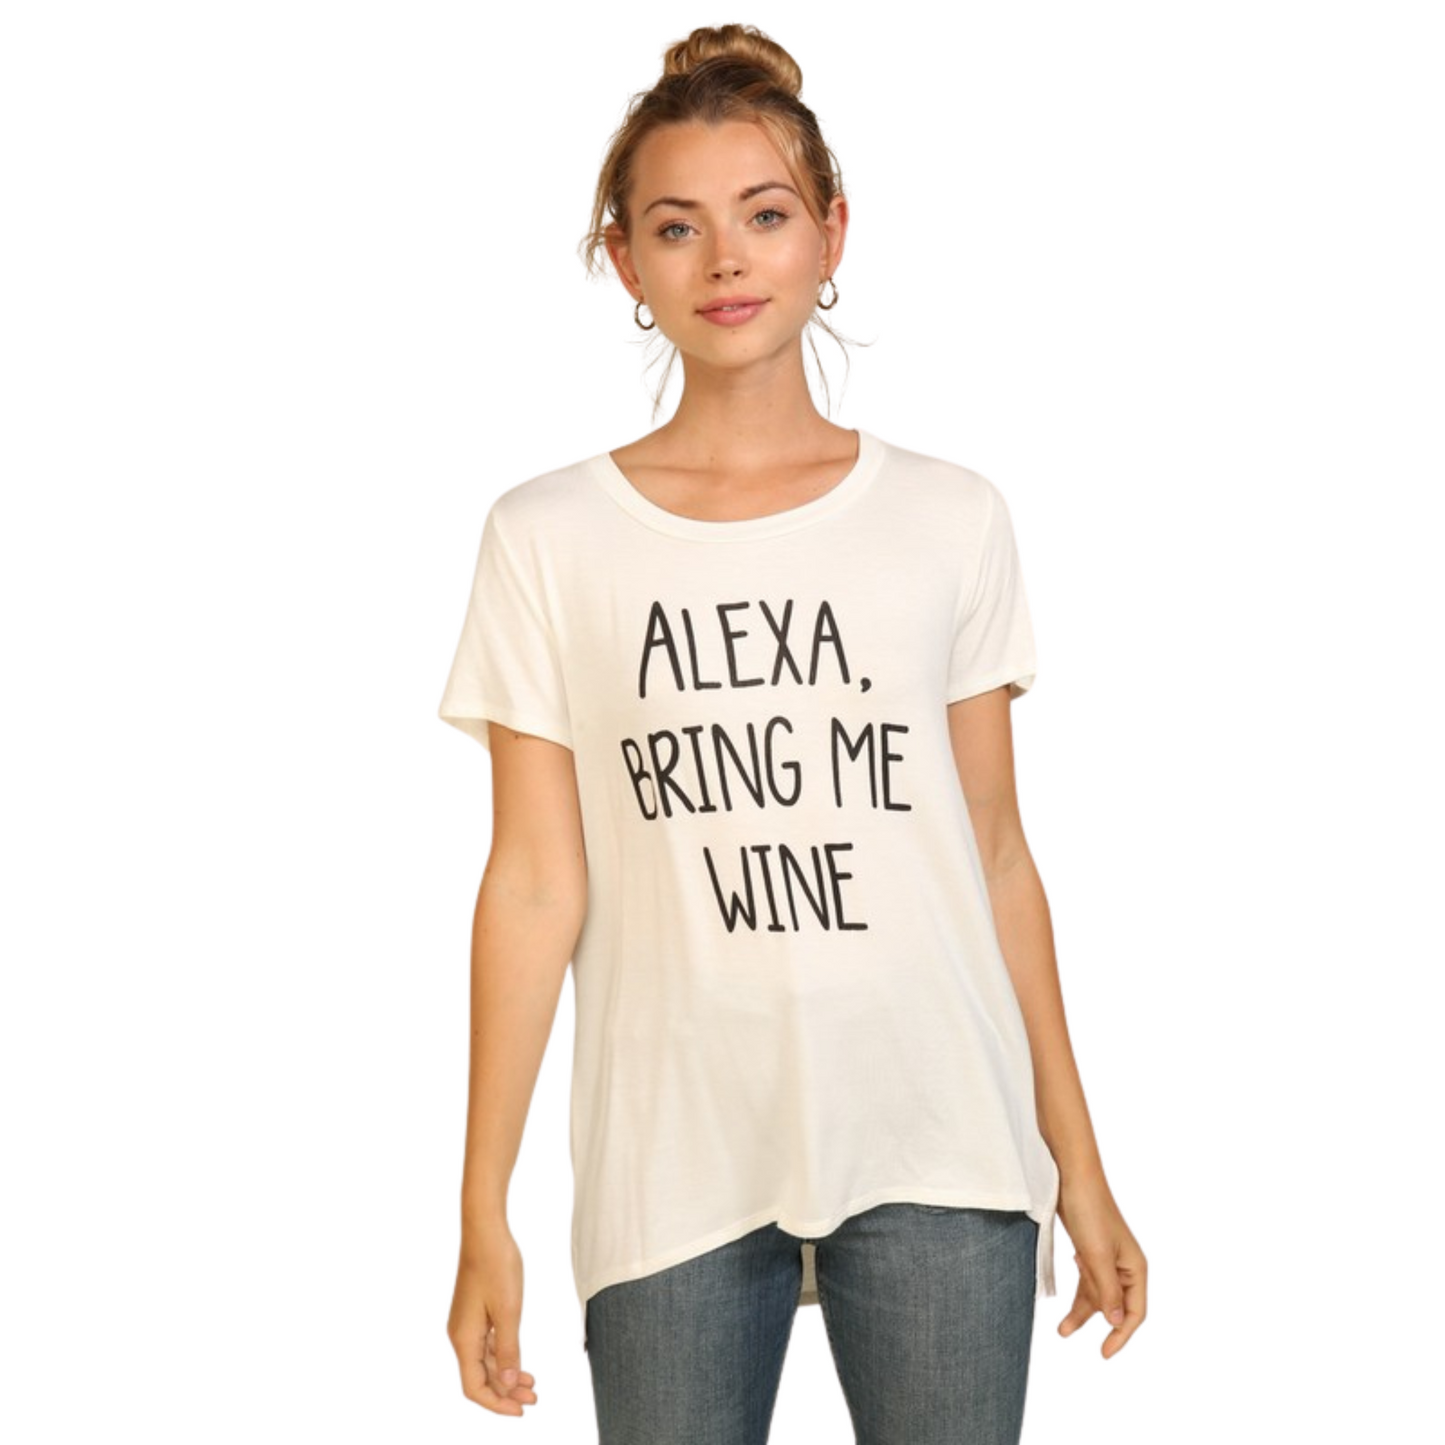 CoverStitched Alexa Bring Me Wine Graphic Tee (S-L)